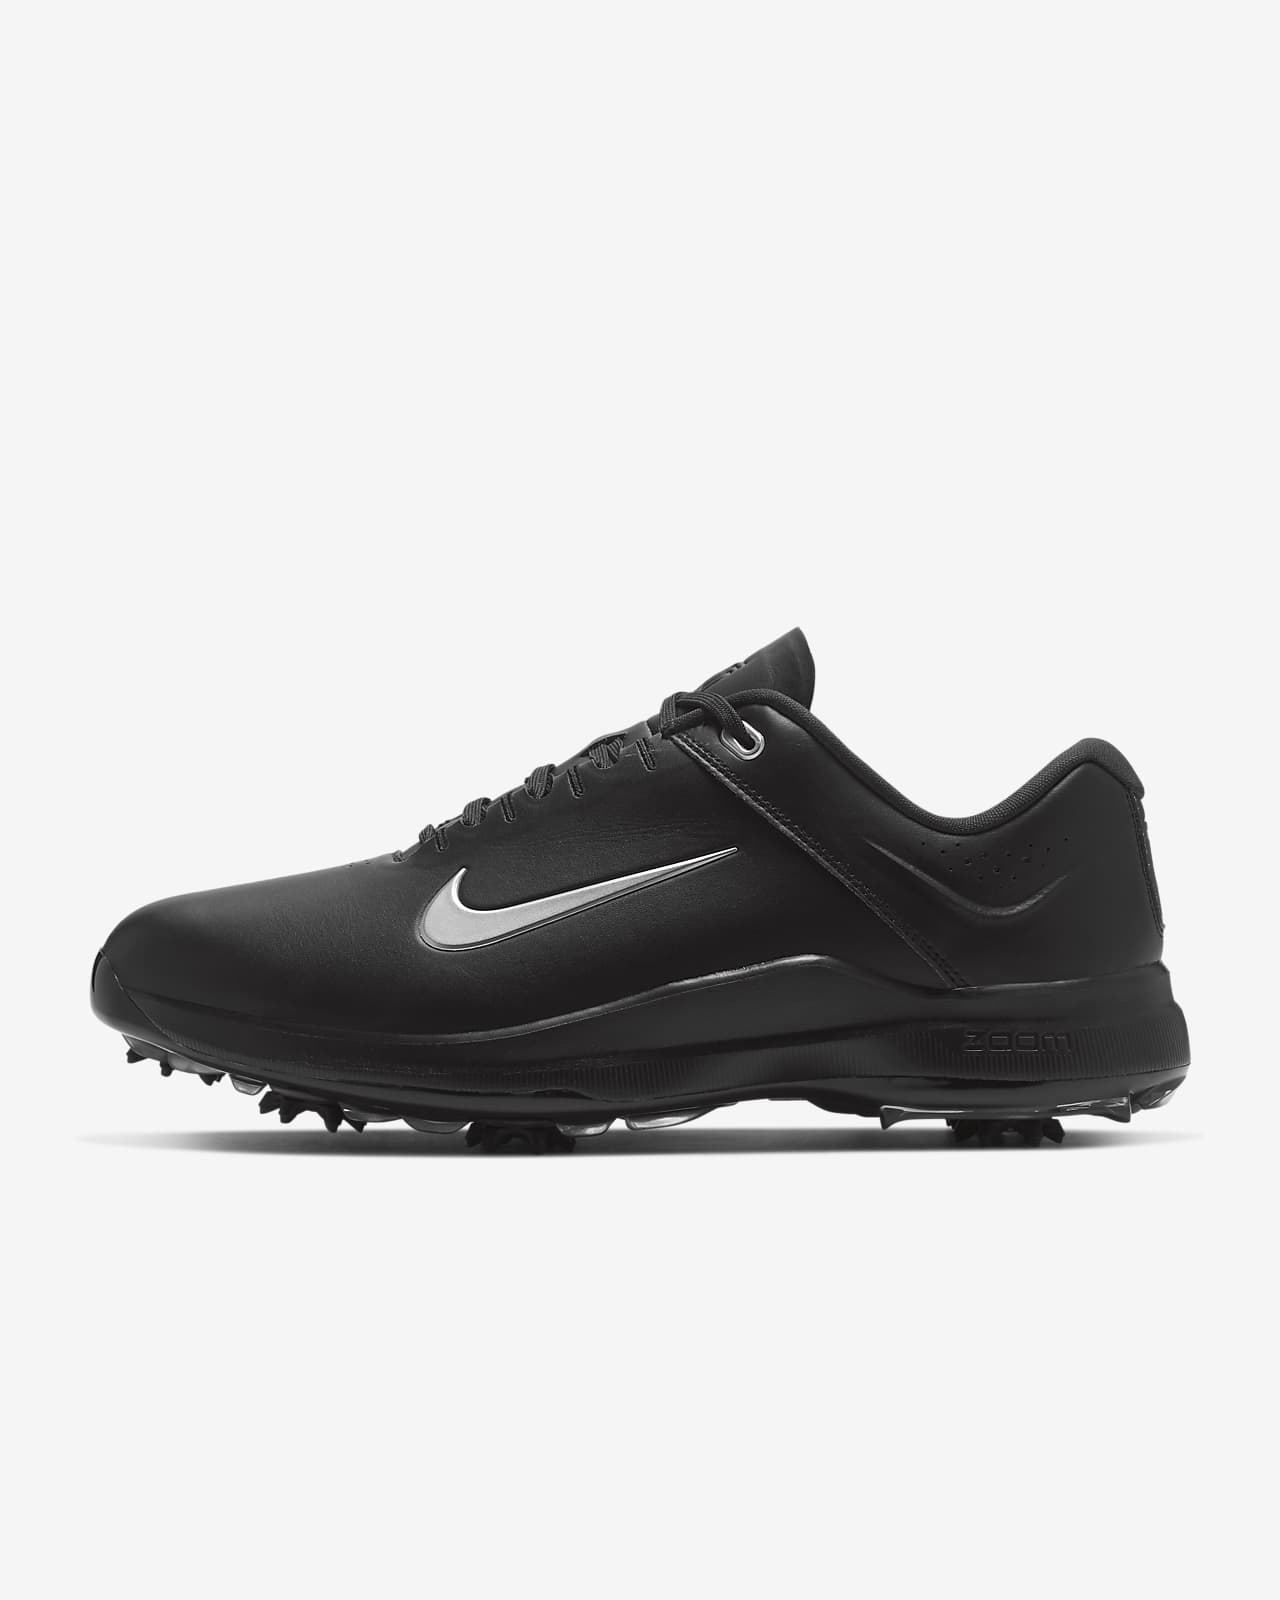 nike tiger golf shoes